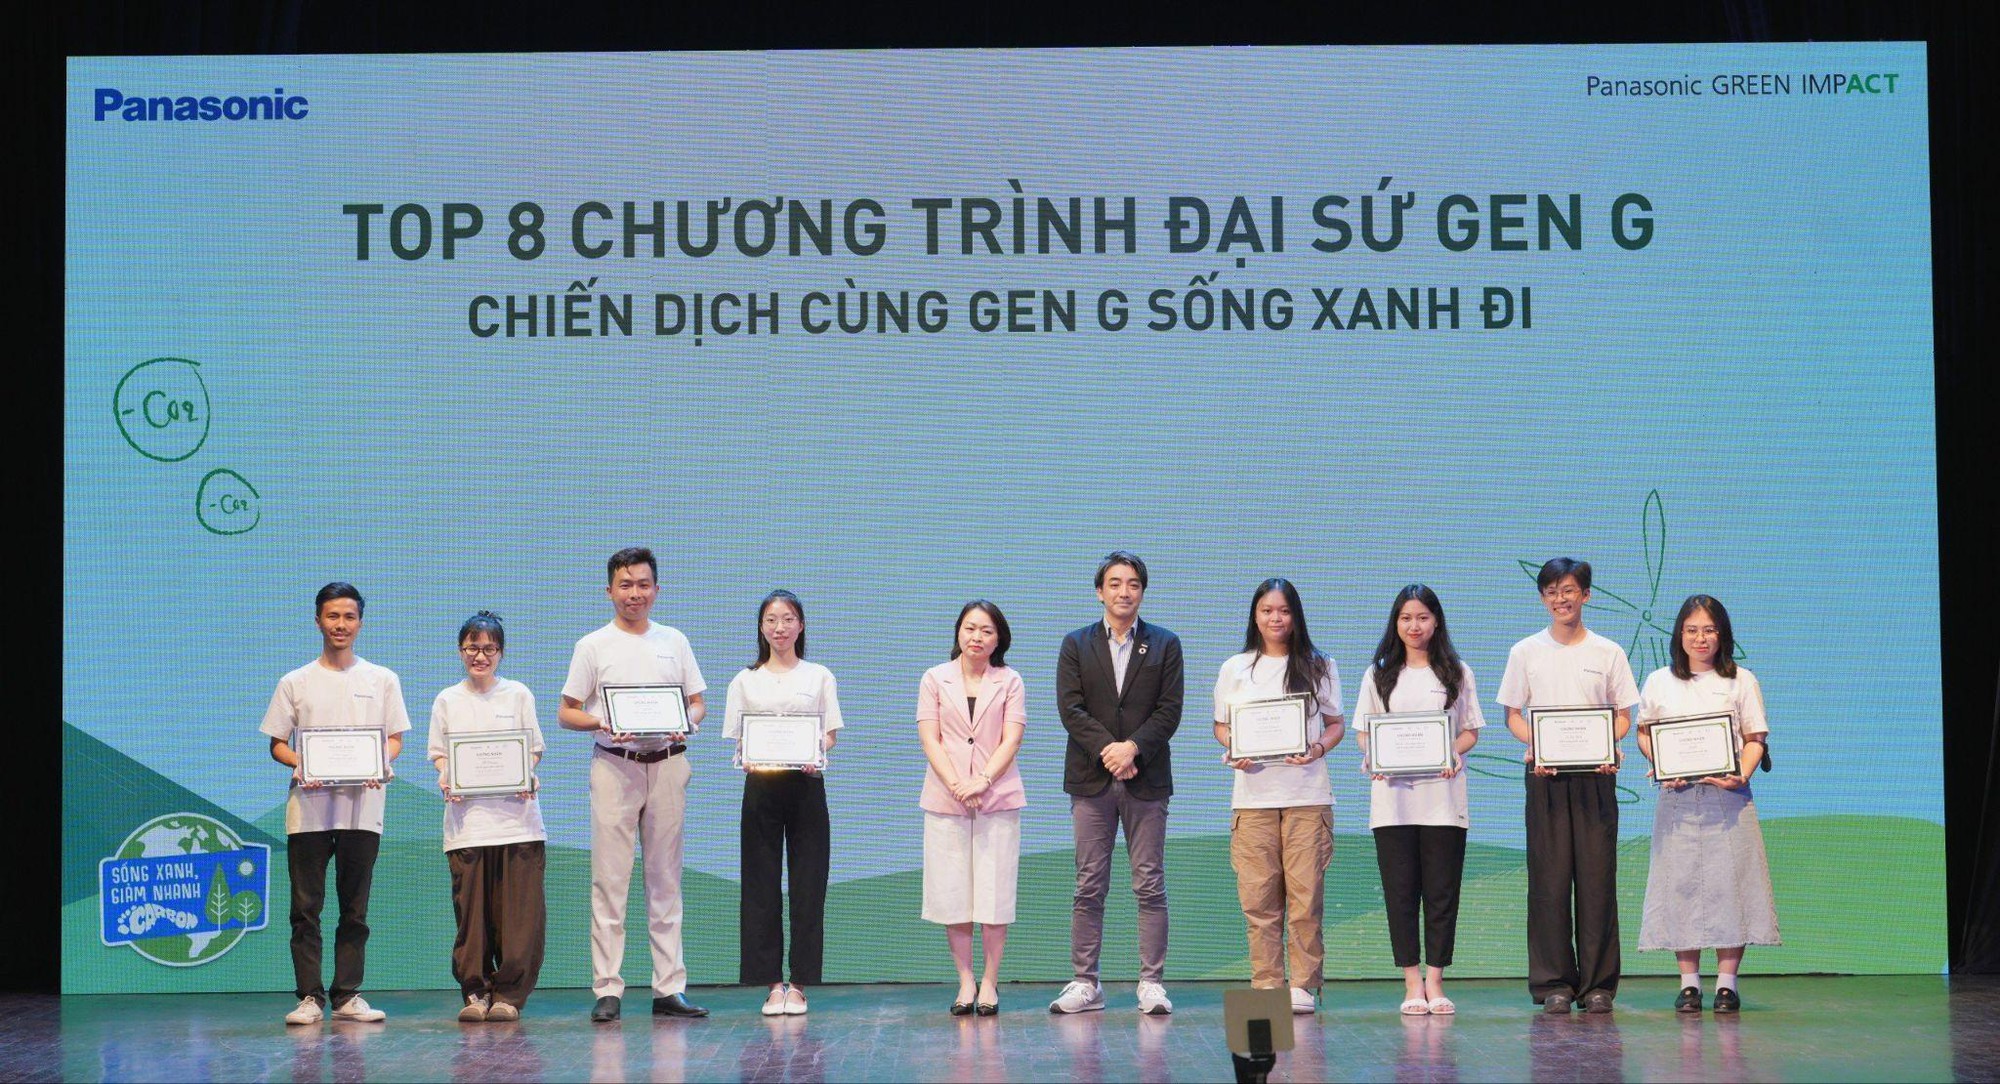 A group of people standing on a stage  Description automatically generated